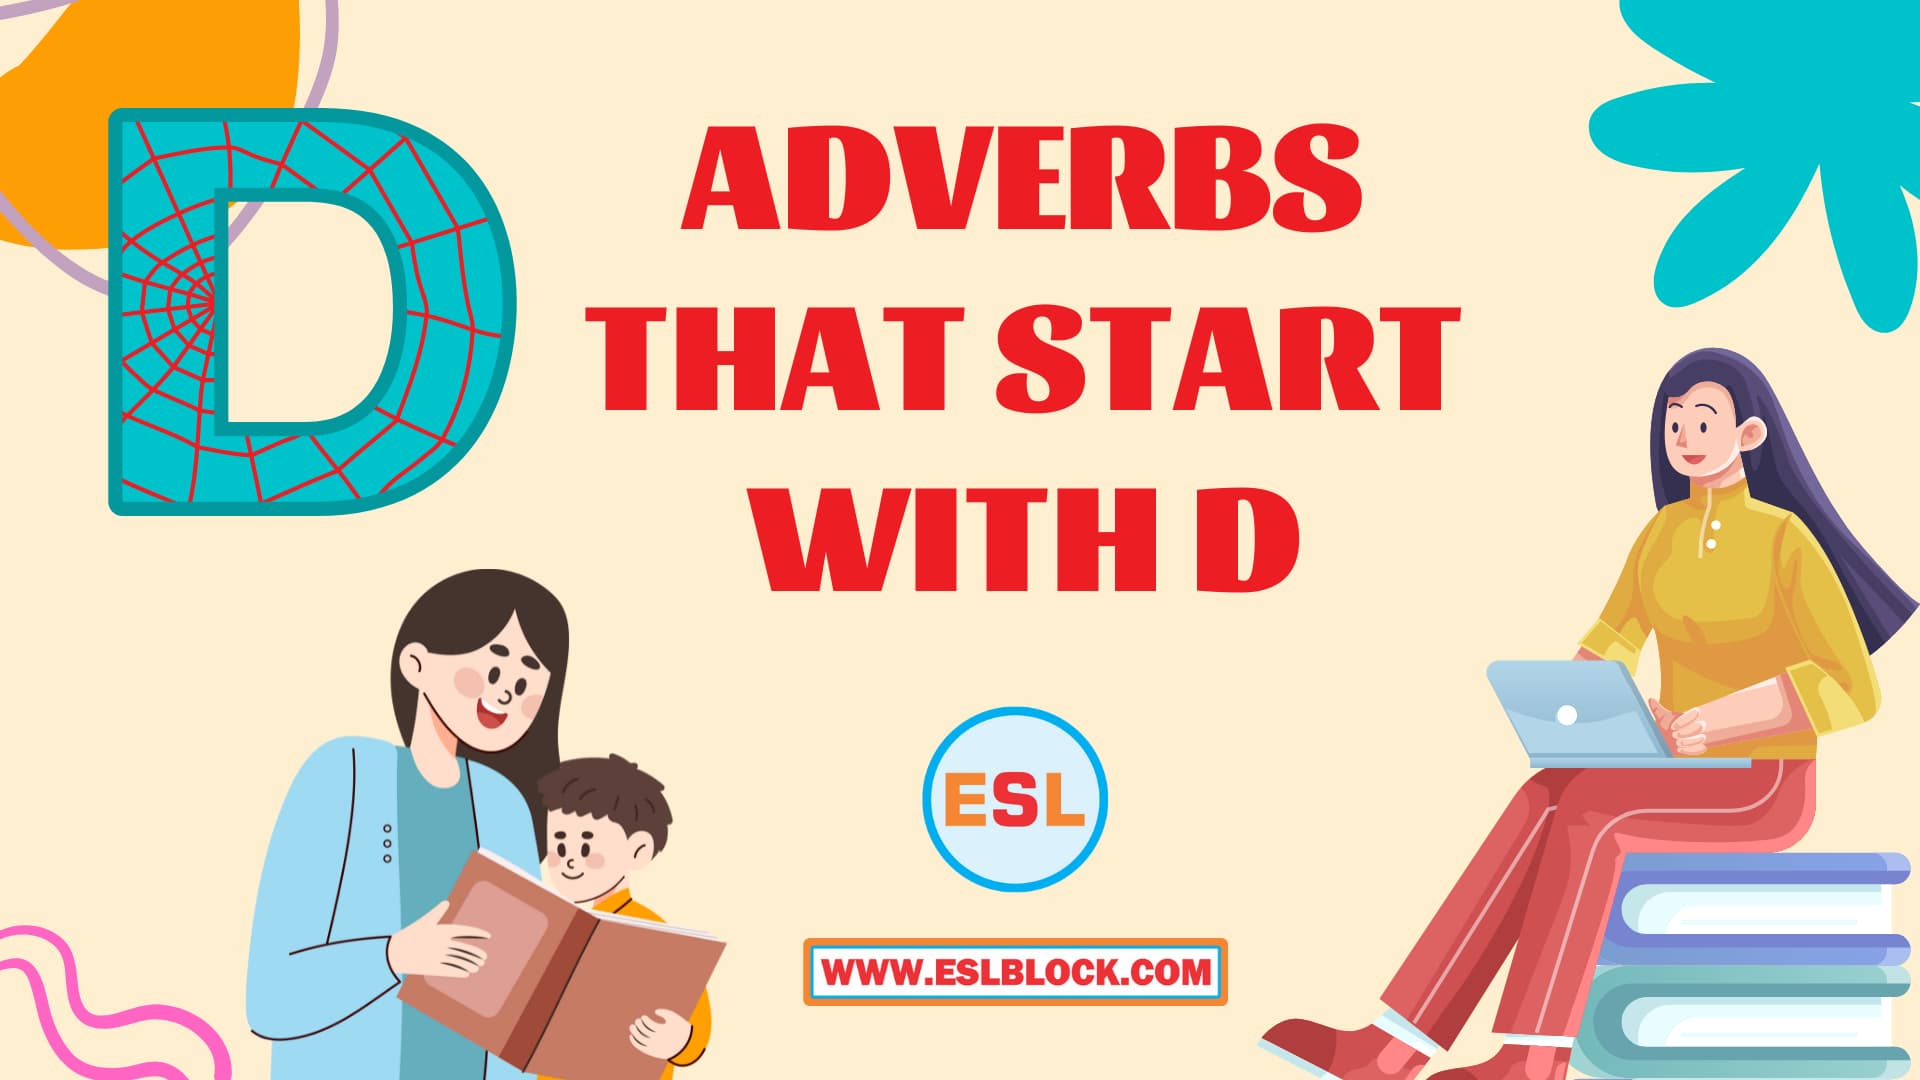 100 Example Sentences Using Adverbs, 4 Letter Adverbs That Start with D, 4 Letter Words, 5 Letter Adverbs That Start with D, 5 Letter Words, 6 Letter Adverbs That Start with D, 6 Letter Words, A to Z Adverbs, AA Adverbs, Adverb vocabulary words, Adverbs, Adverbs That Start with D, Adverbs with Example Sentences, All Adverbs, Types of Adverbs, Types of Adverbs with Example Sentences, Vocabulary, What are Adverbs, What are the types of Adverbs, Words That with D